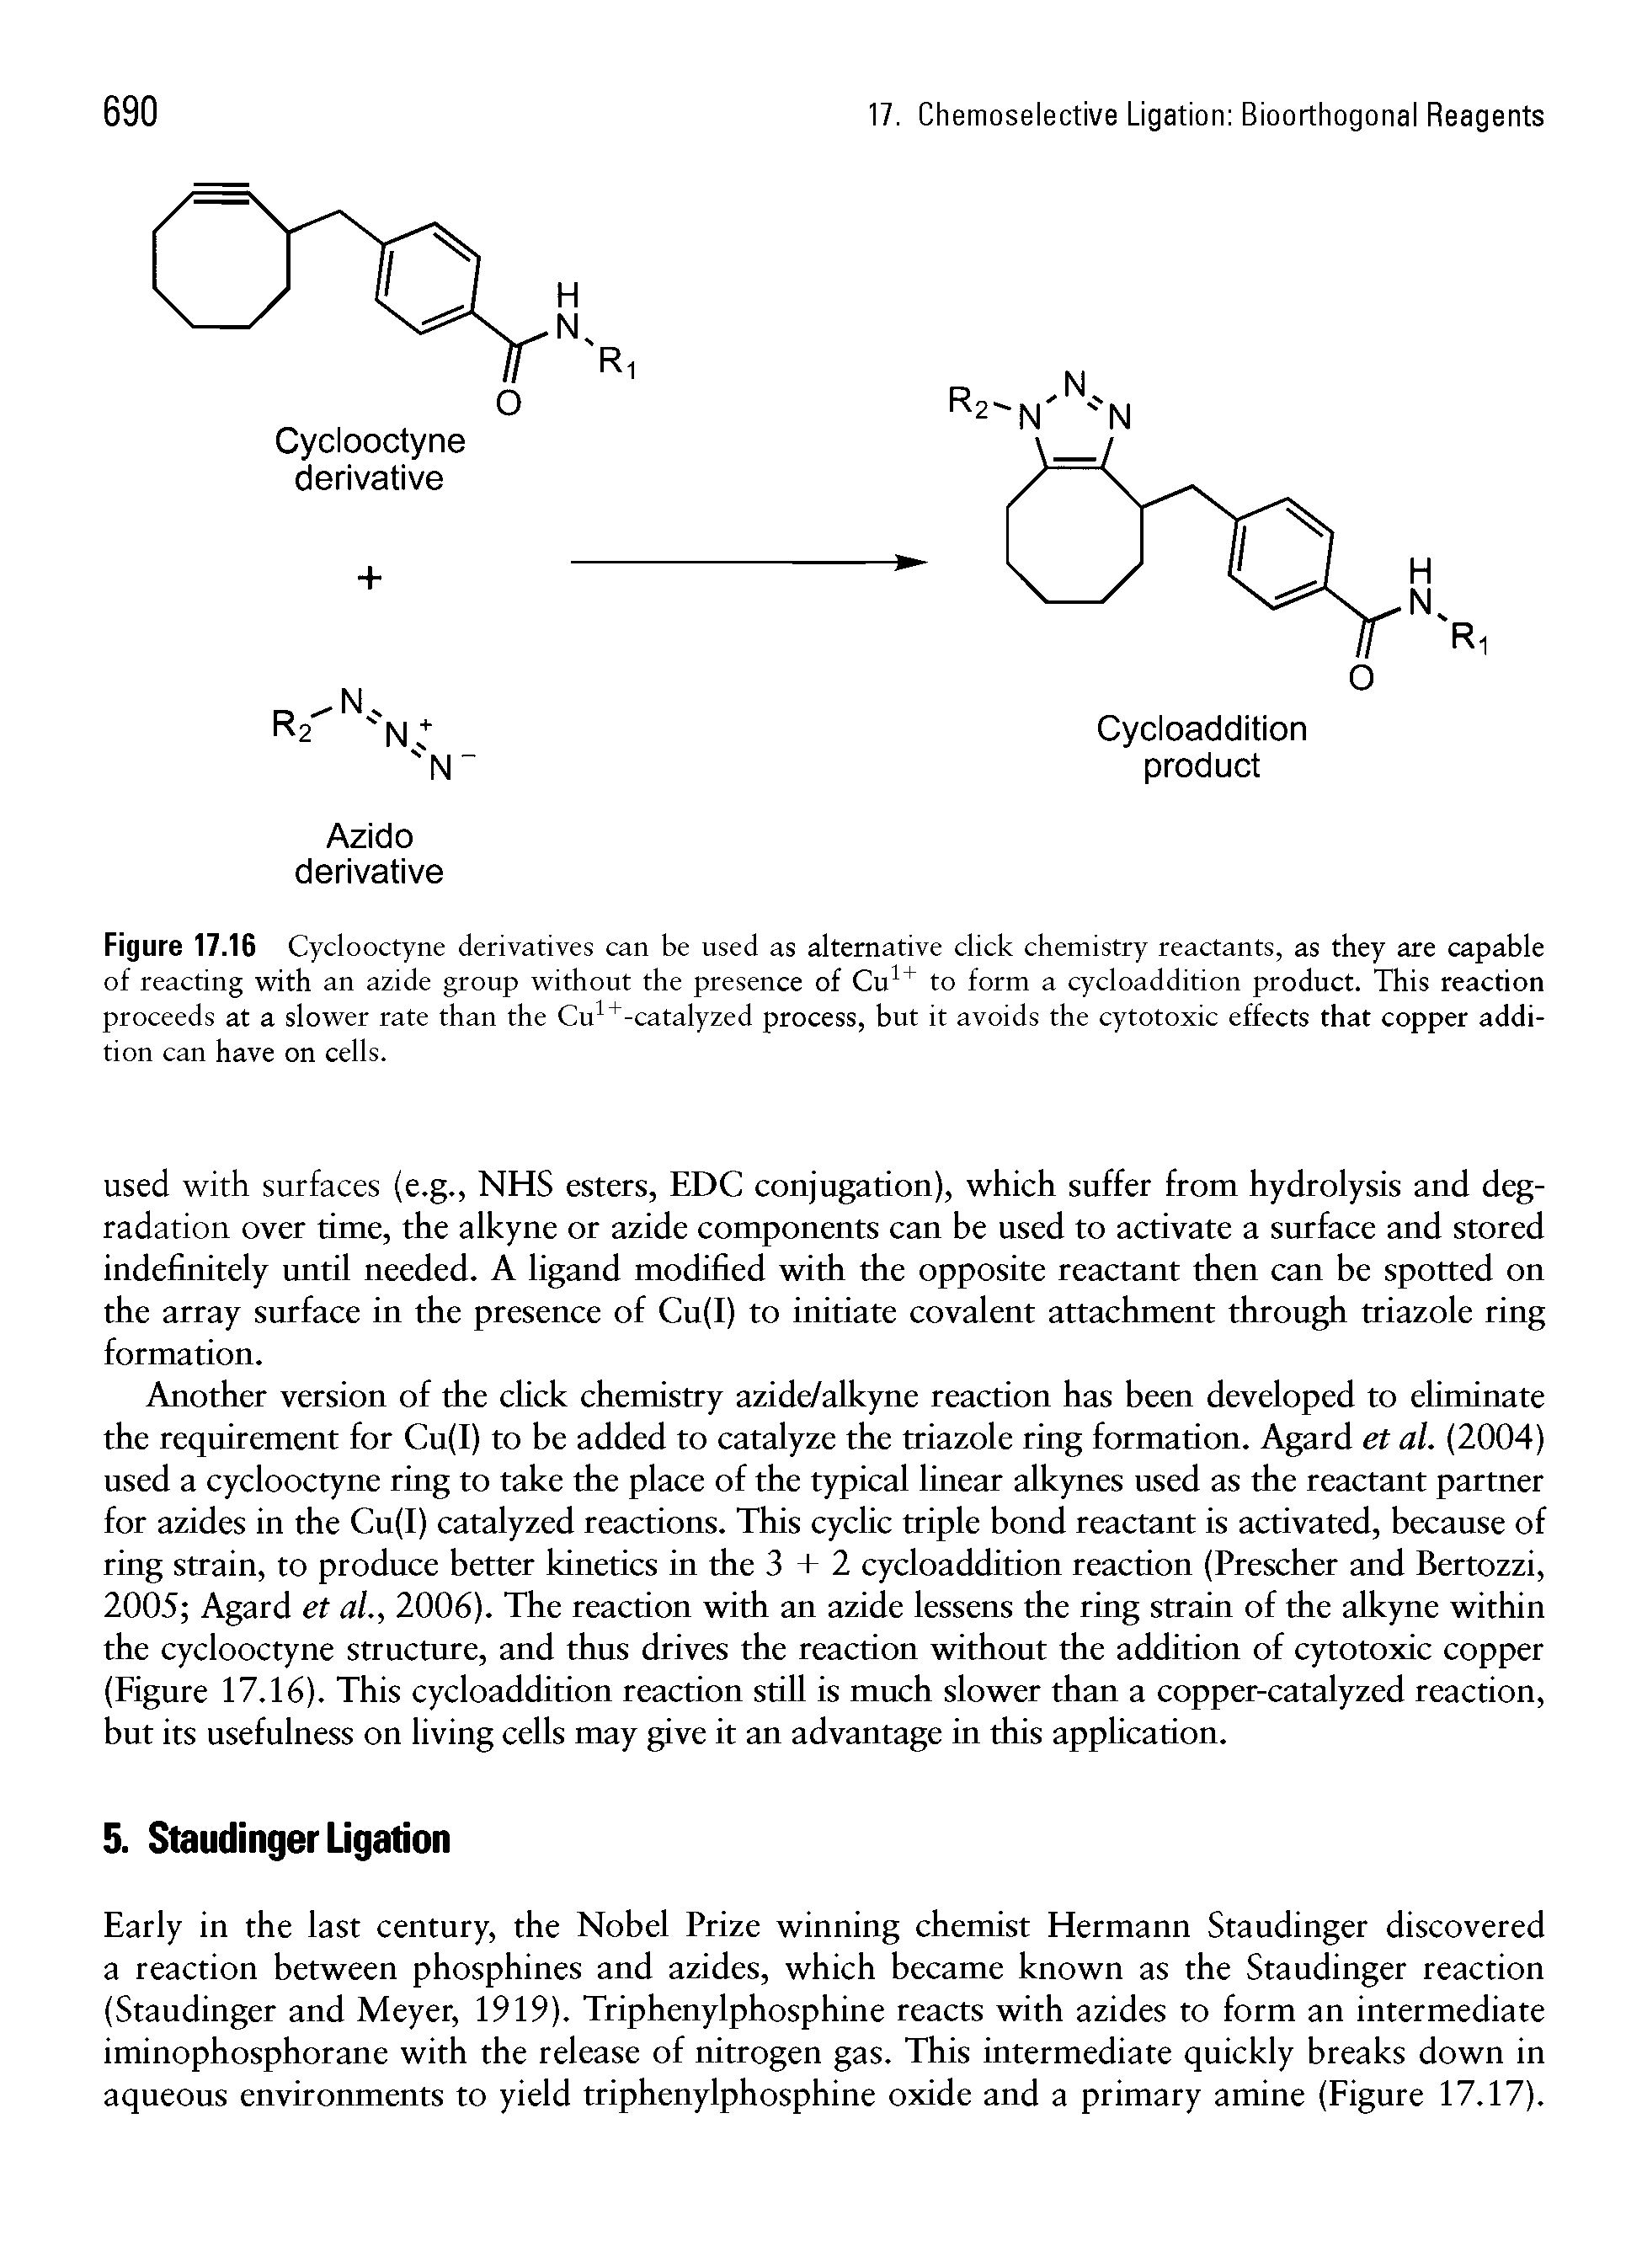 Figure 17.16 Cyclooctyne derivatives can be used as alternative click chemistry reactants, as they are capable of reacting with an azide group without the presence of Cu1+ to form a cycloaddition product. This reaction proceeds at a slower rate than the Cu1+-catalyzed process, but it avoids the cytotoxic effects that copper addition can have on cells.